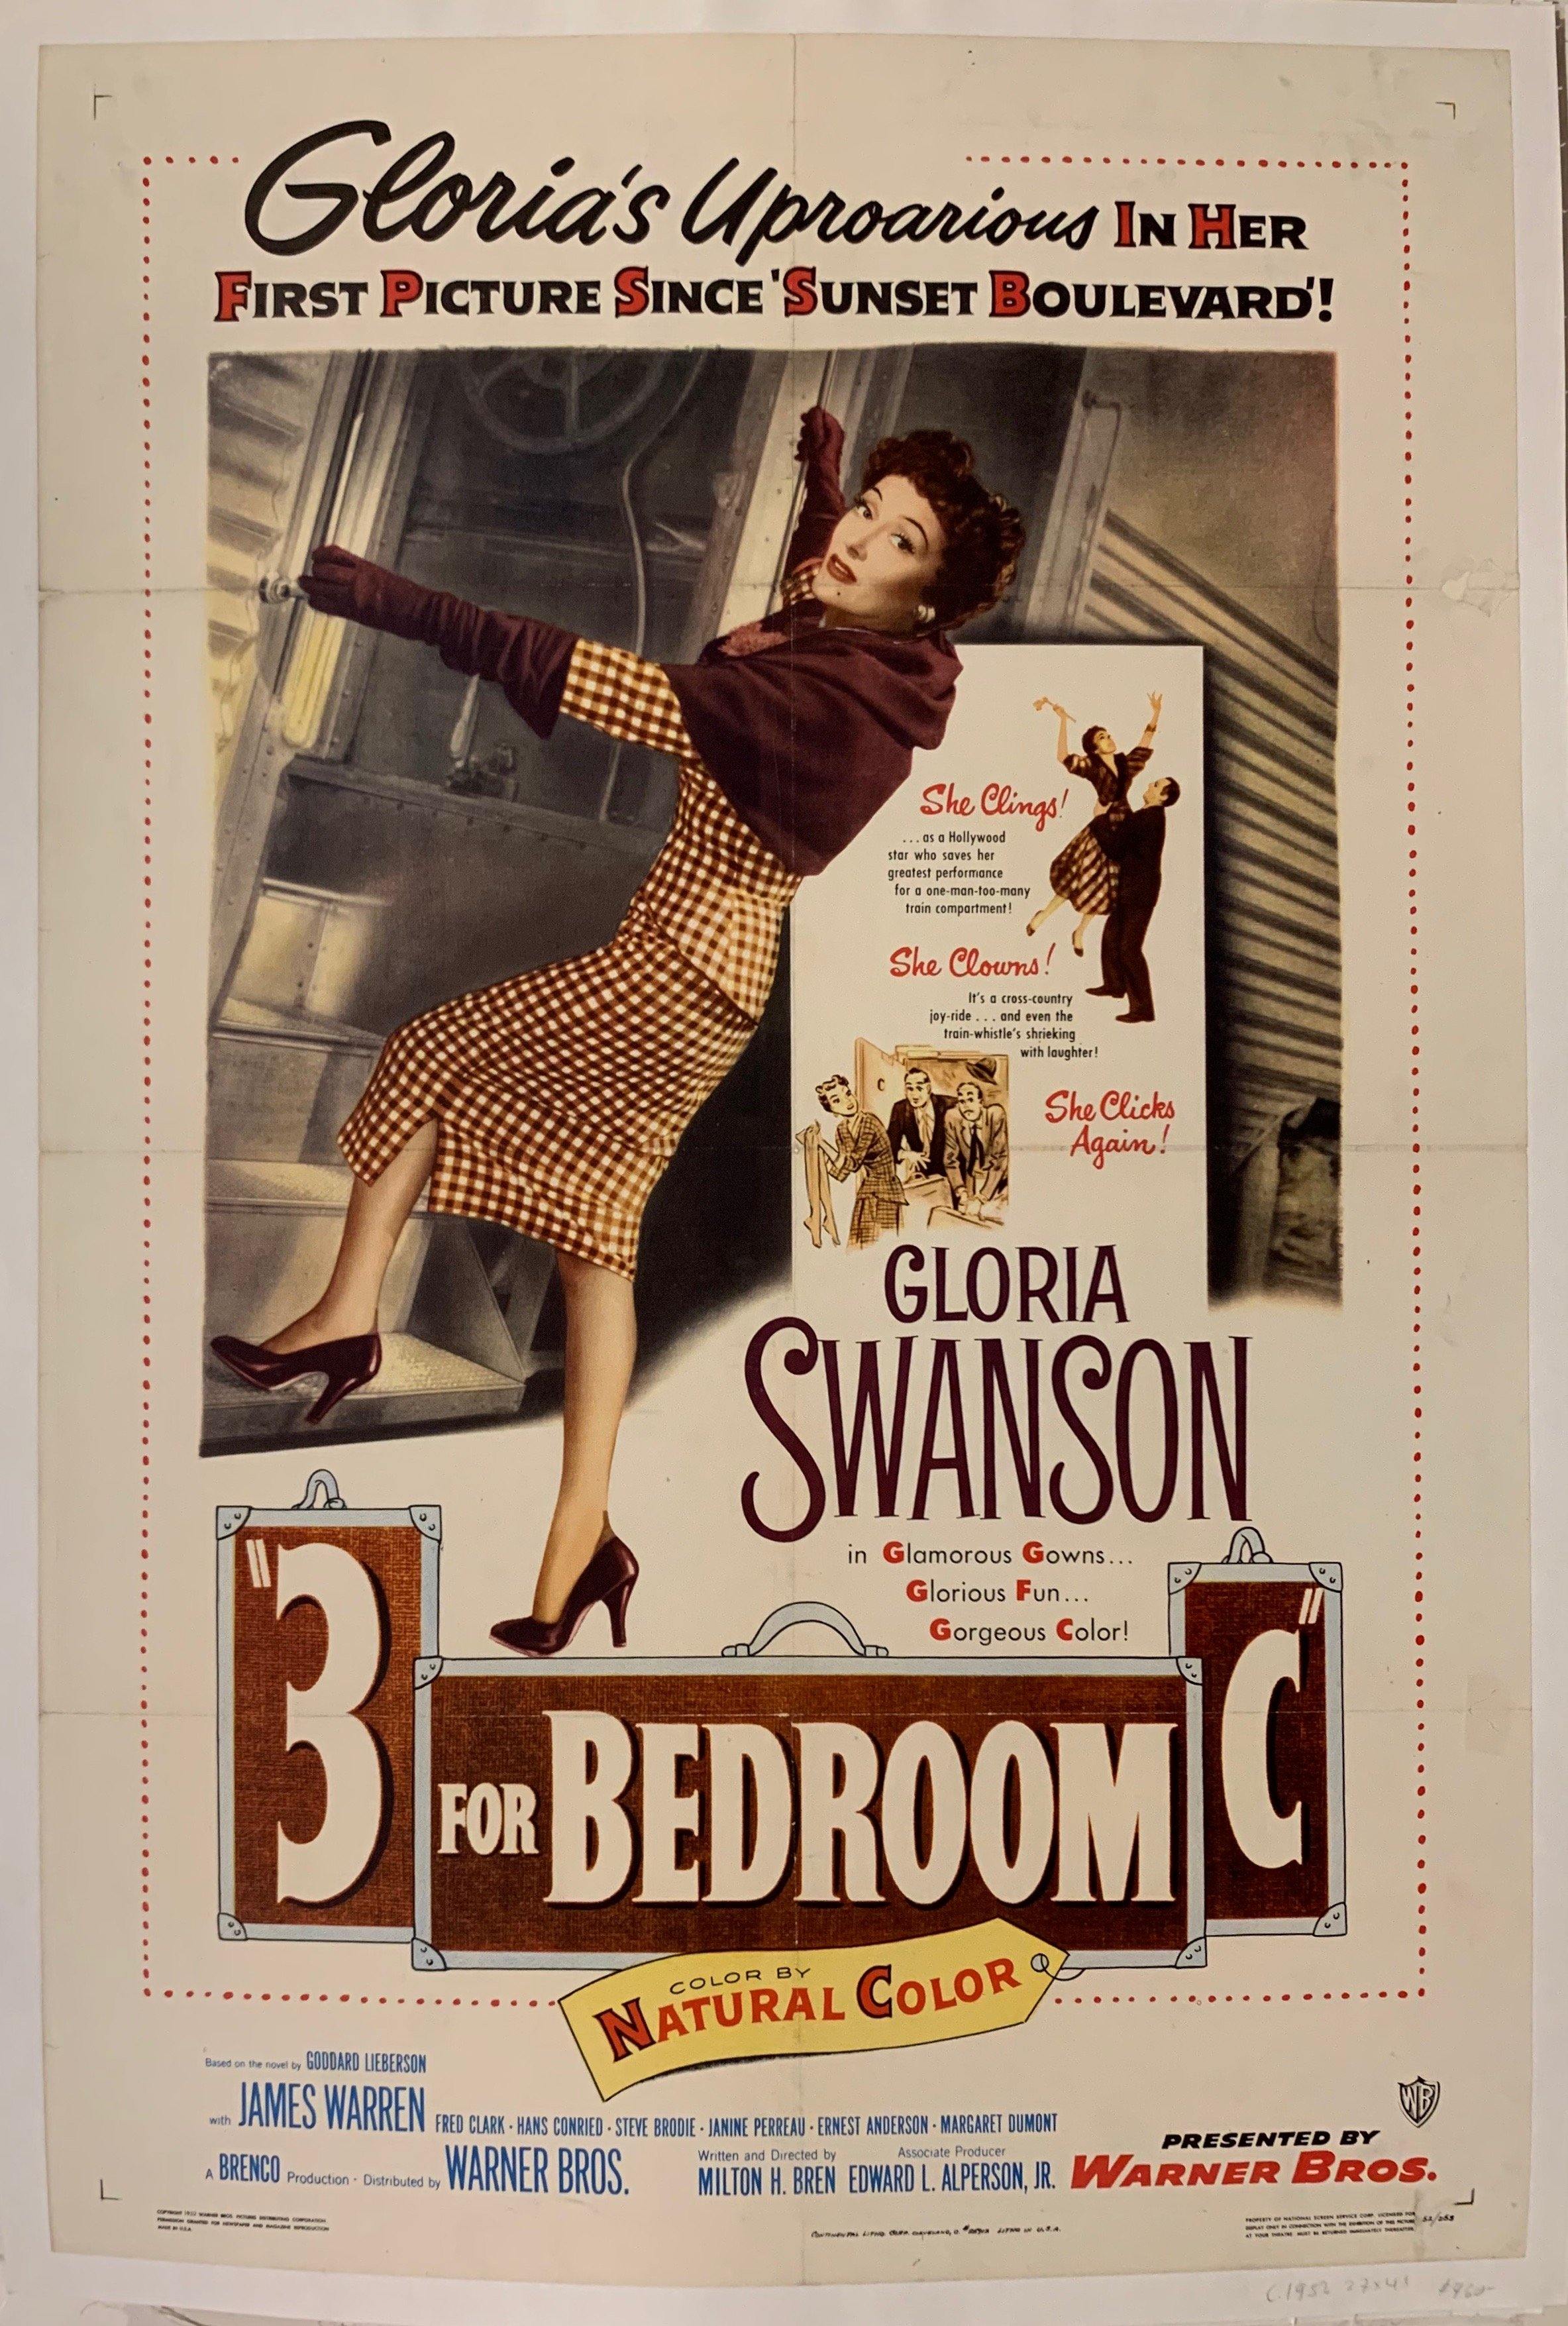 3 For Bedroom C Film Poster - Poster Museum